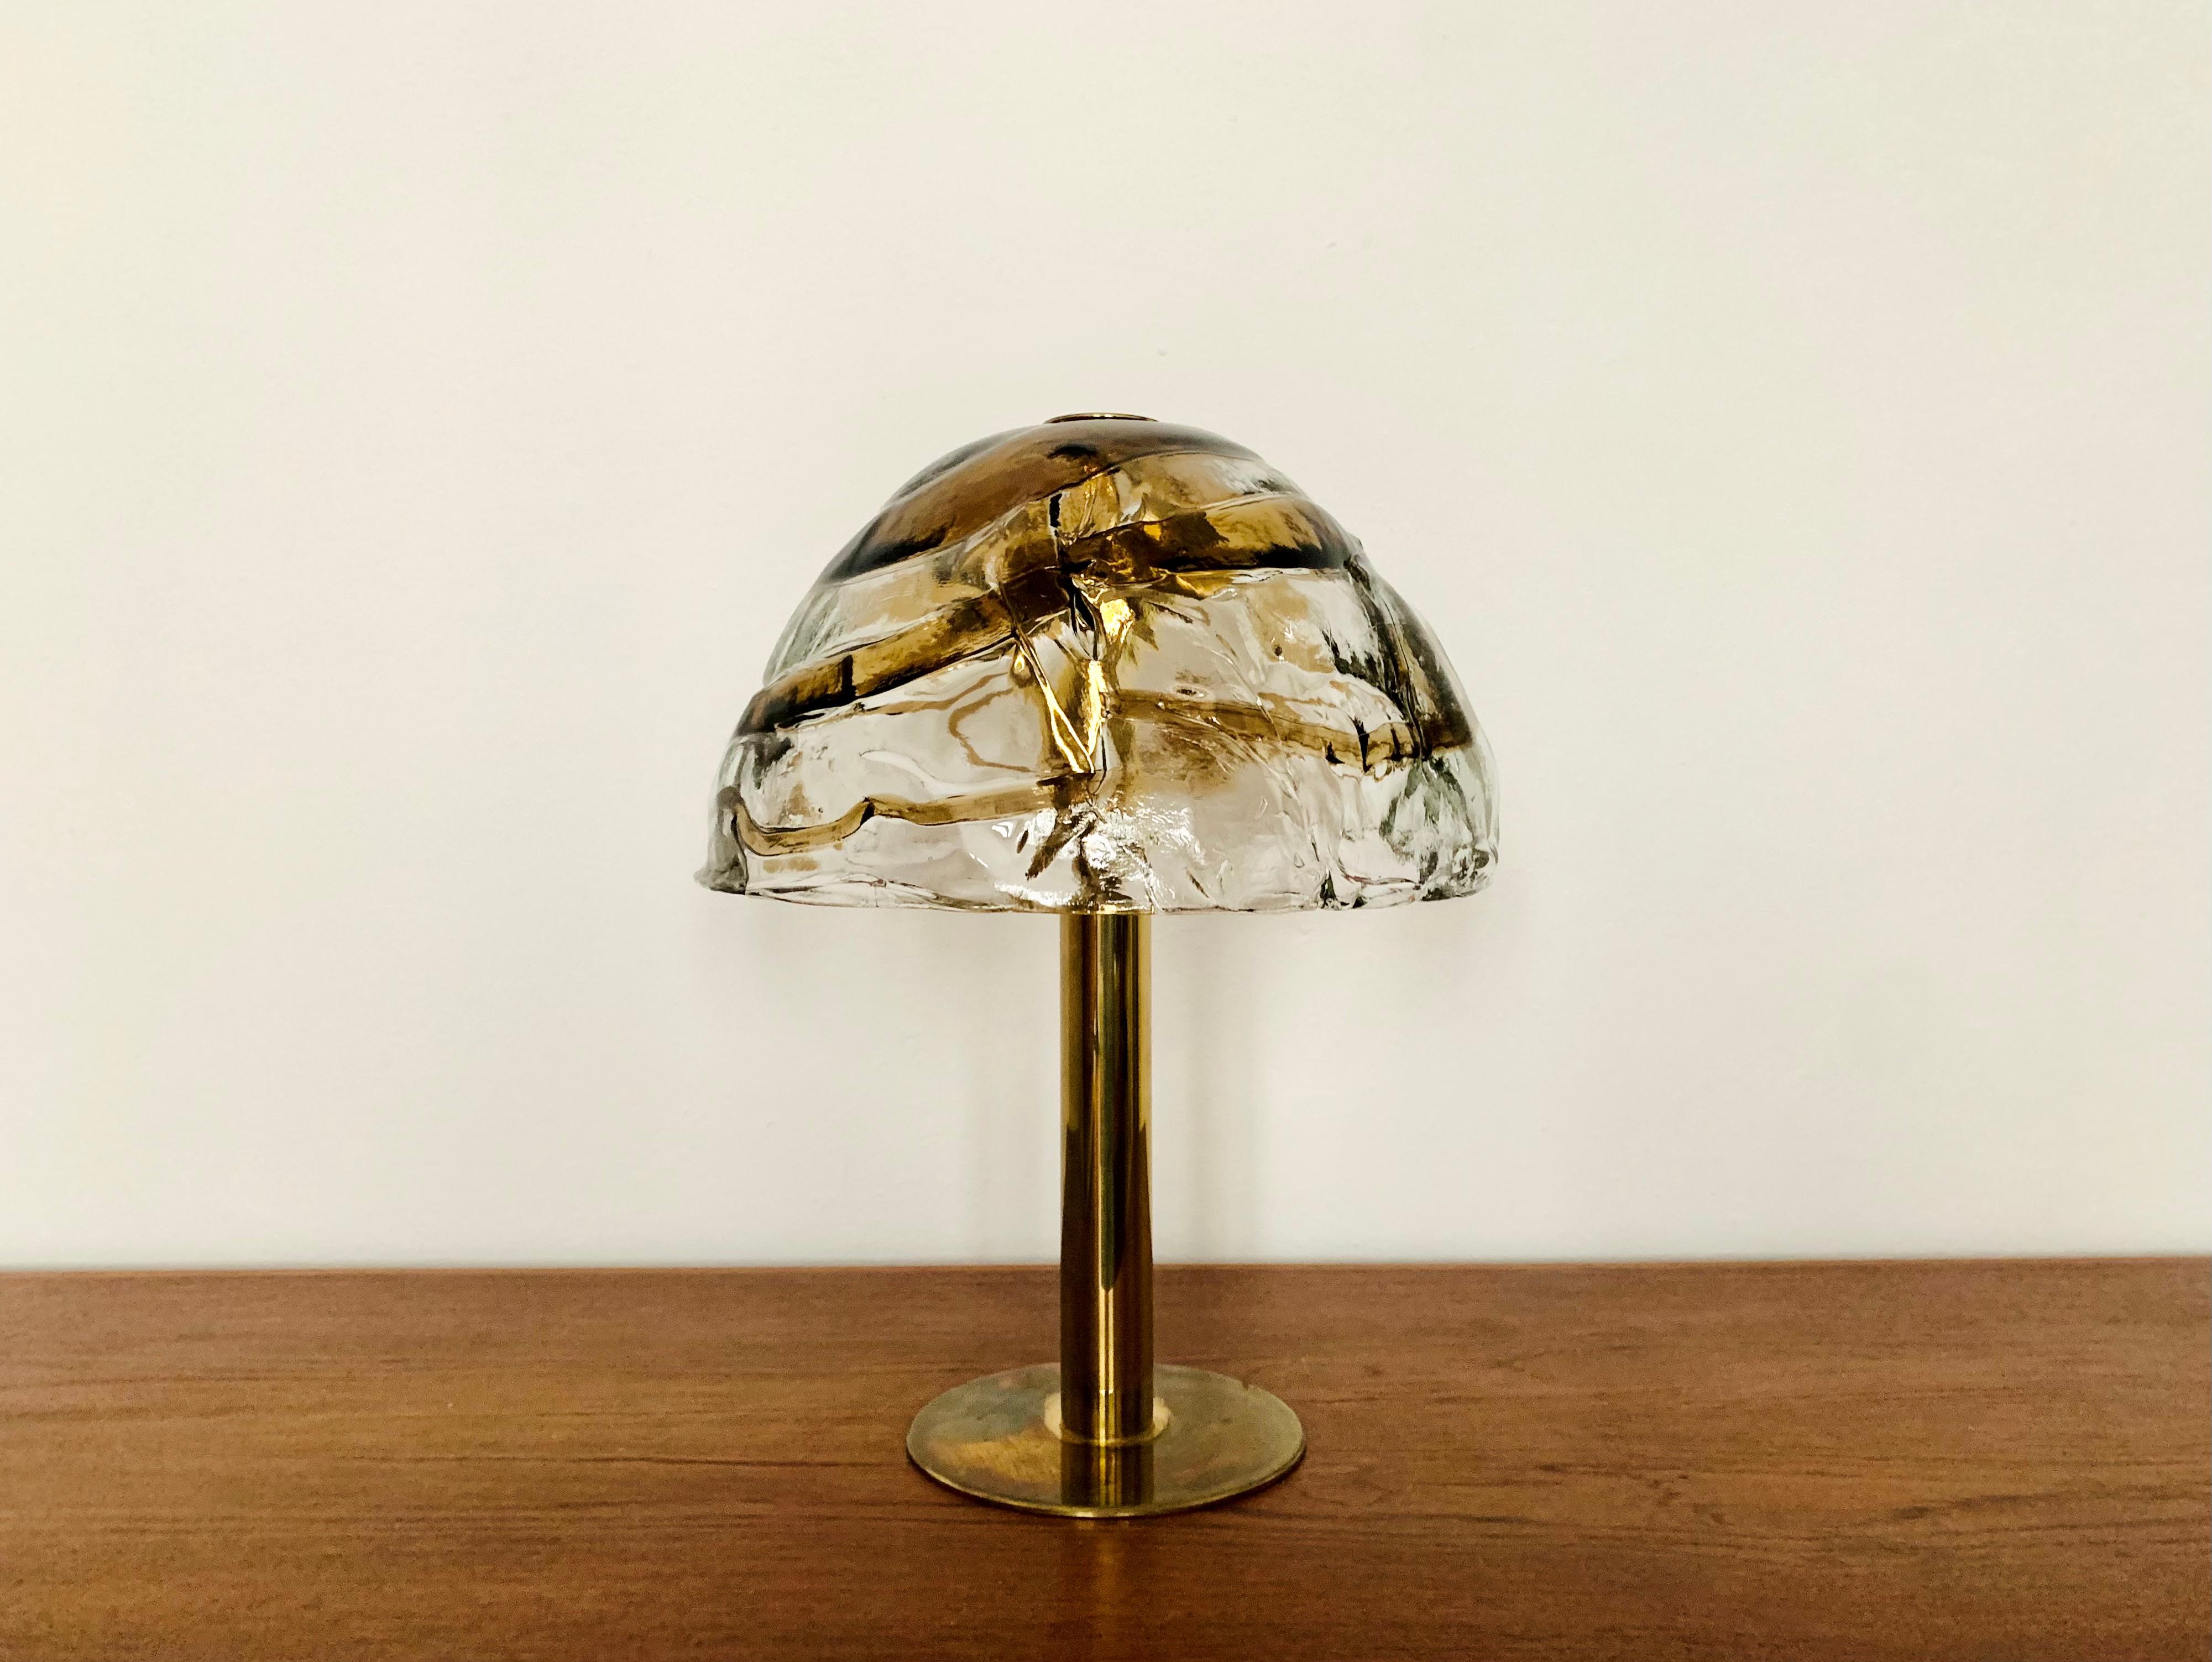 Stunning Murano glass table lamp from the 1960s.
The heavy, two-tone structured glass spreads an impressive, sparkling play of light.
Very high quality workmanship and fantastic design.

Design: J.T. Squid
Manufacturer: Franken KG

Condition:

Very